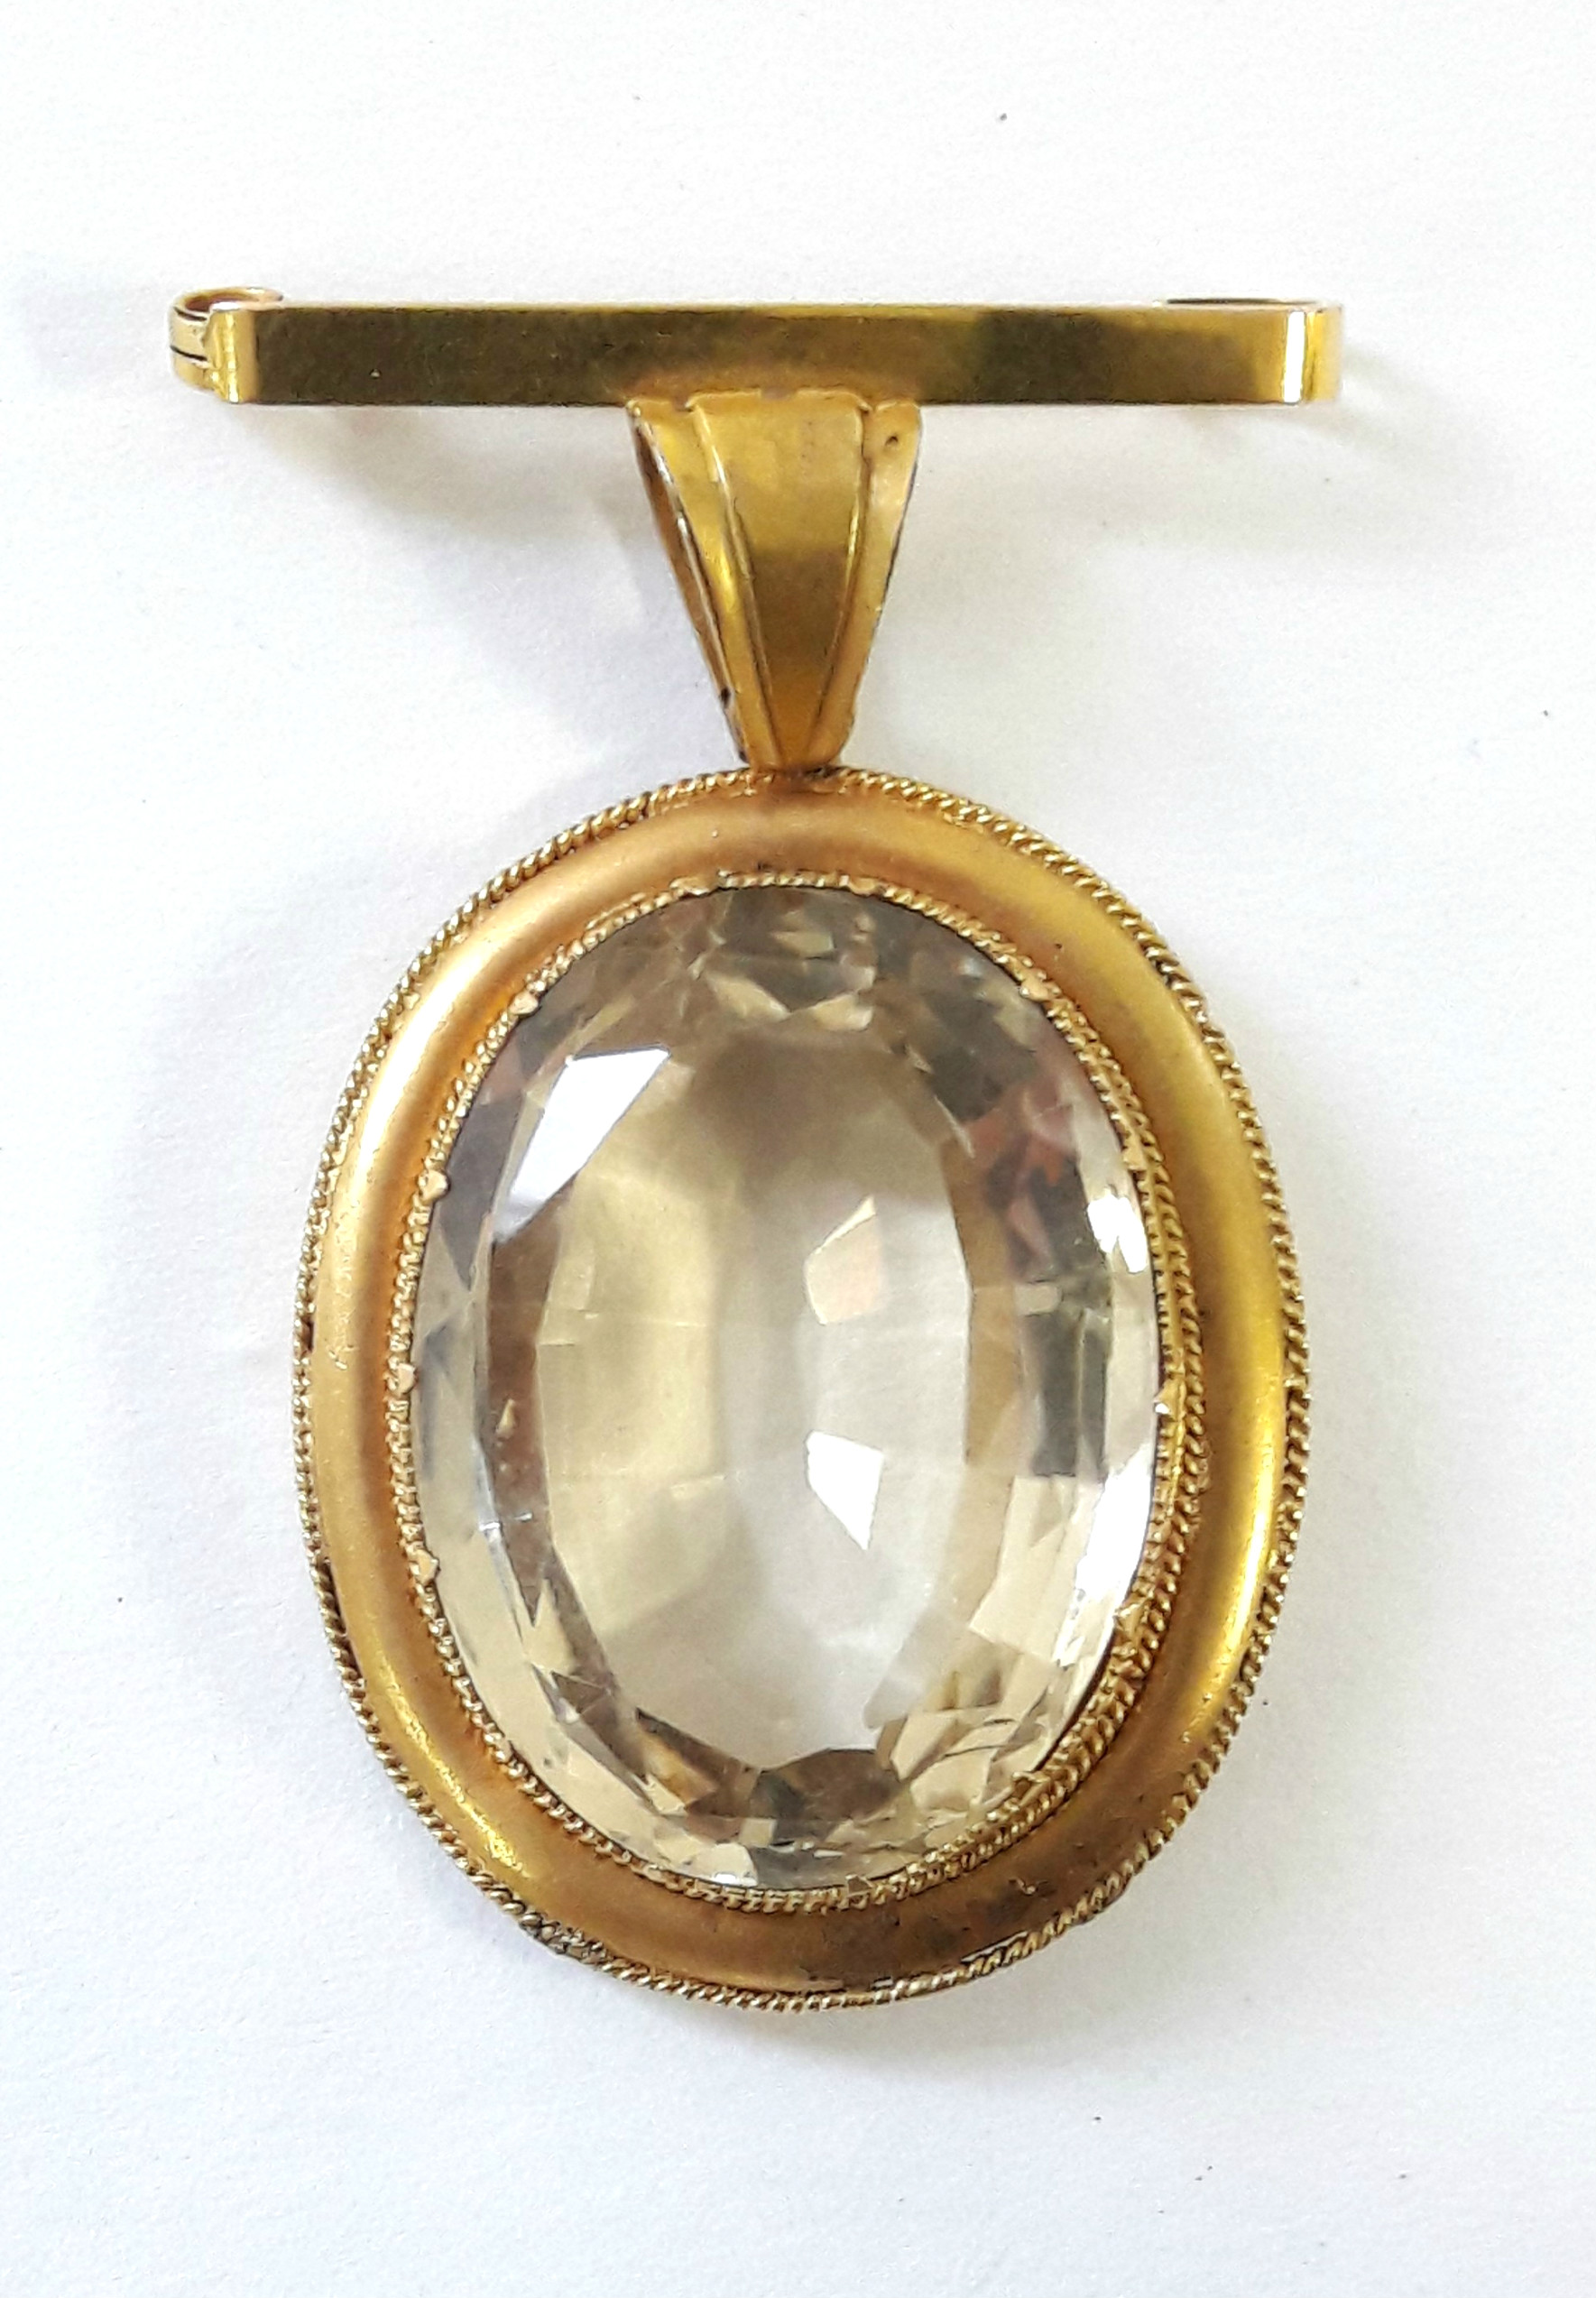 A large oval citrine pendant in 9ct. gold mount with integral bar brooch; Chester 1921.